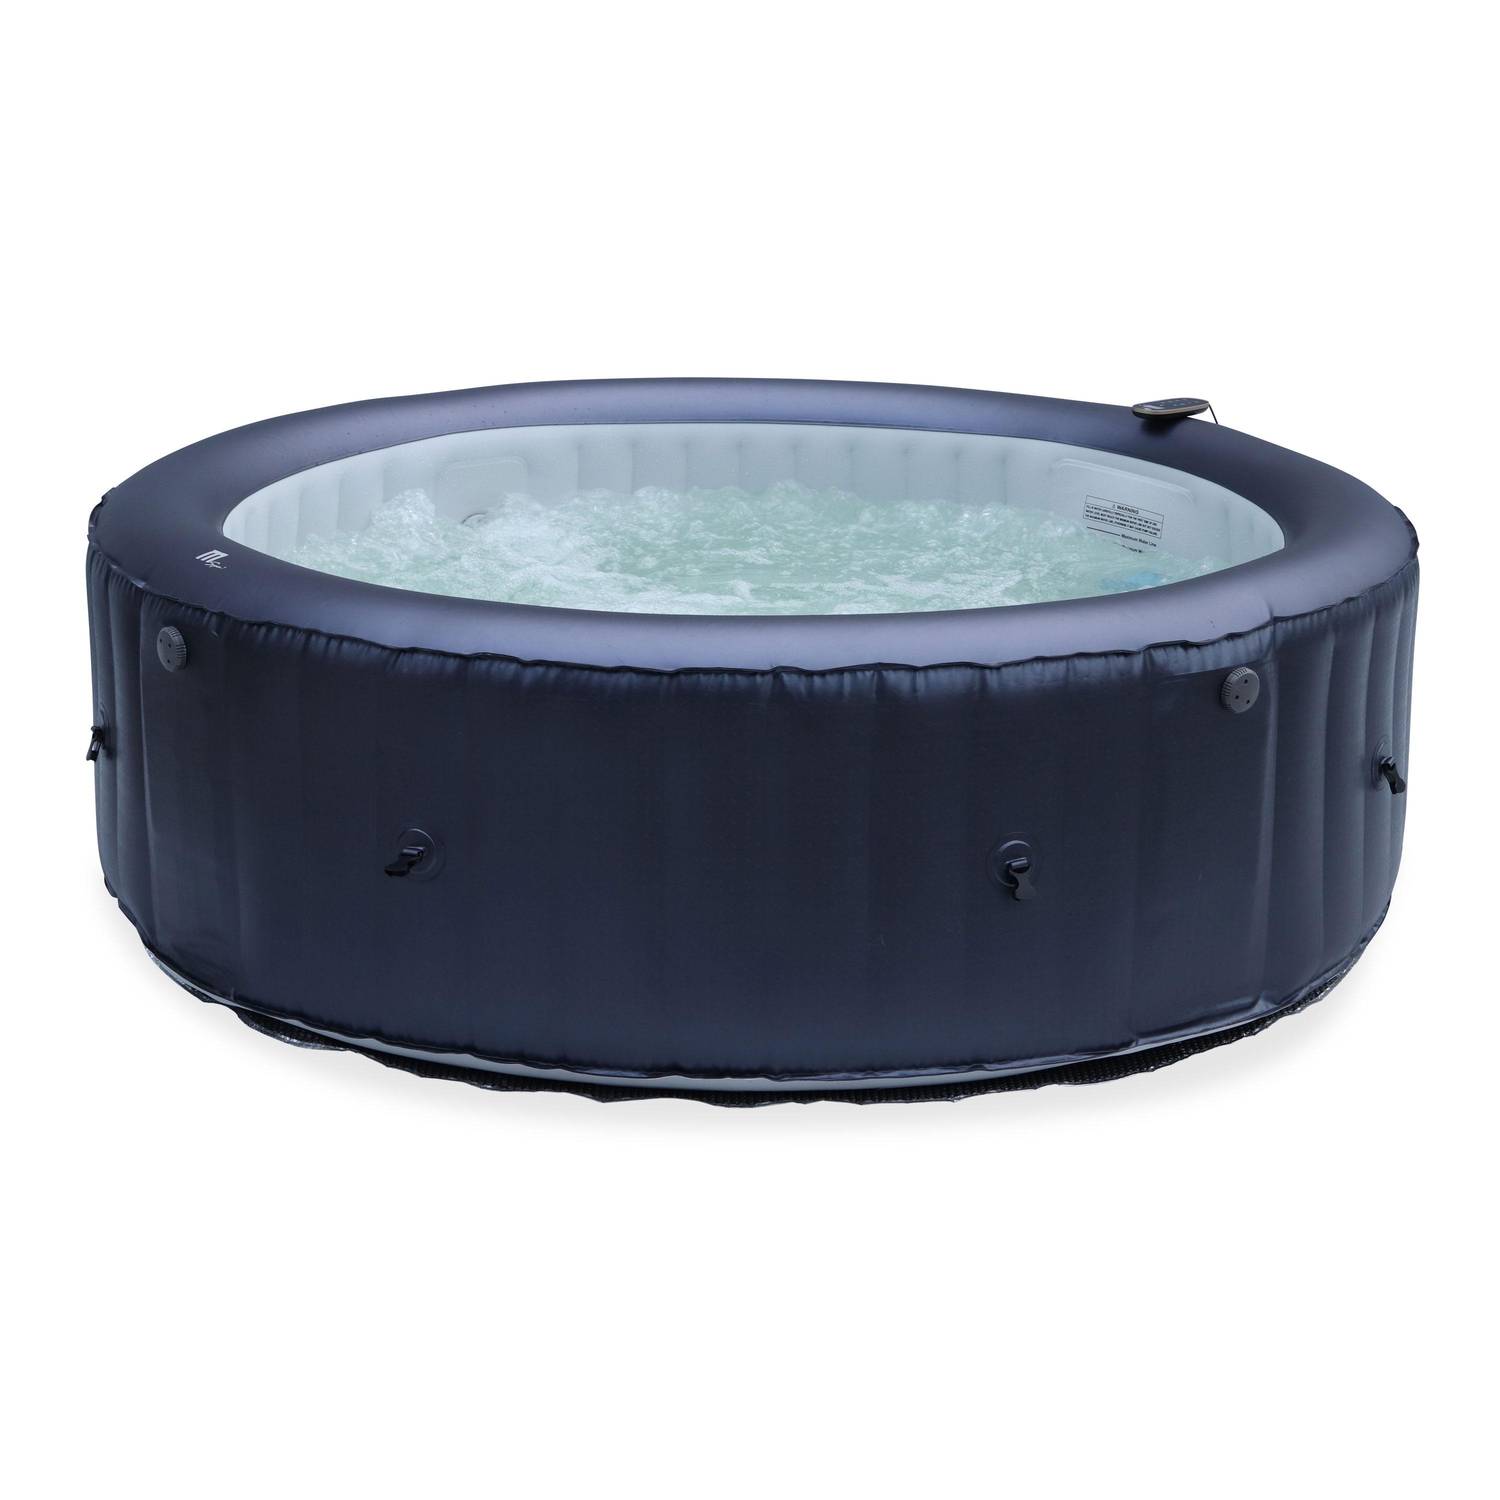  6-person premium round inflatable hot tub MSpa - Ø205cm round 6-person spa, PVC, pump, heating, inflation hose, massage hydrojets, 2 filter cartridges, lid and remote control - Carlton 6 - Blue Photo1